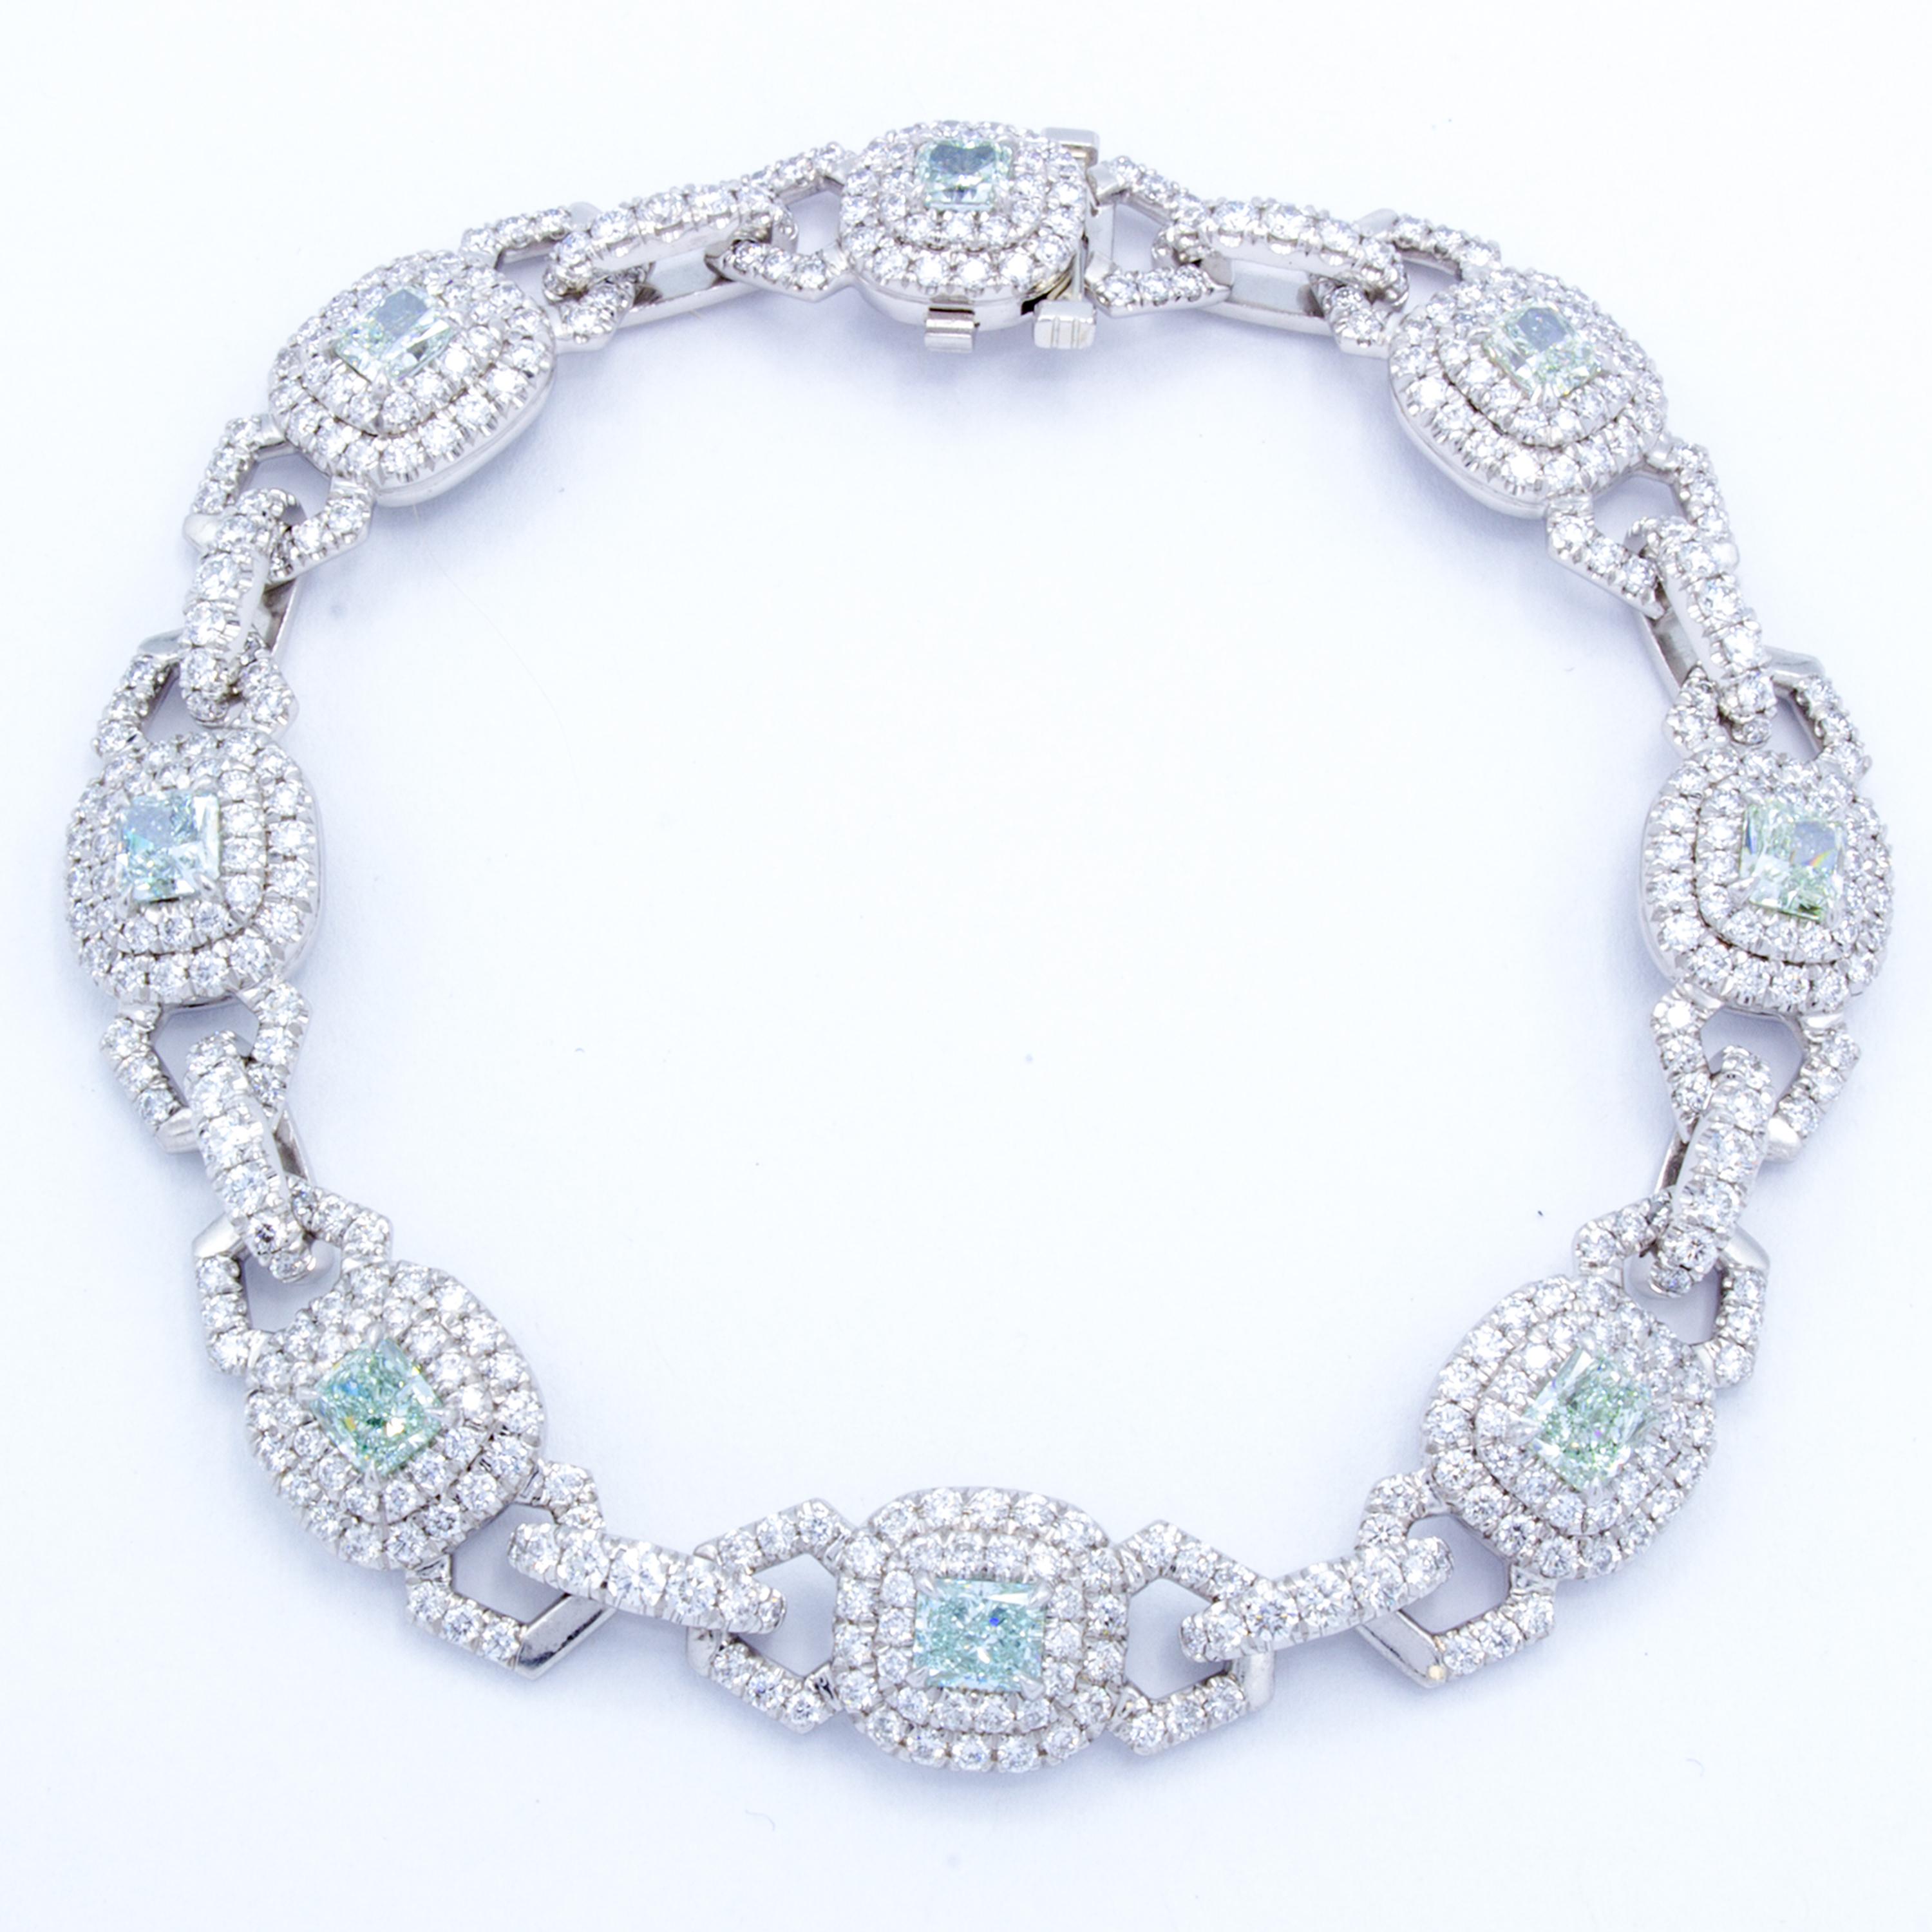 An elegant strand of glittering round brilliant pave set diamonds over a bracelet of pure platinum. A special collection of rare GIA certified radiant cut fancy light green diamonds rest connected by the double halo and linked design of yet another